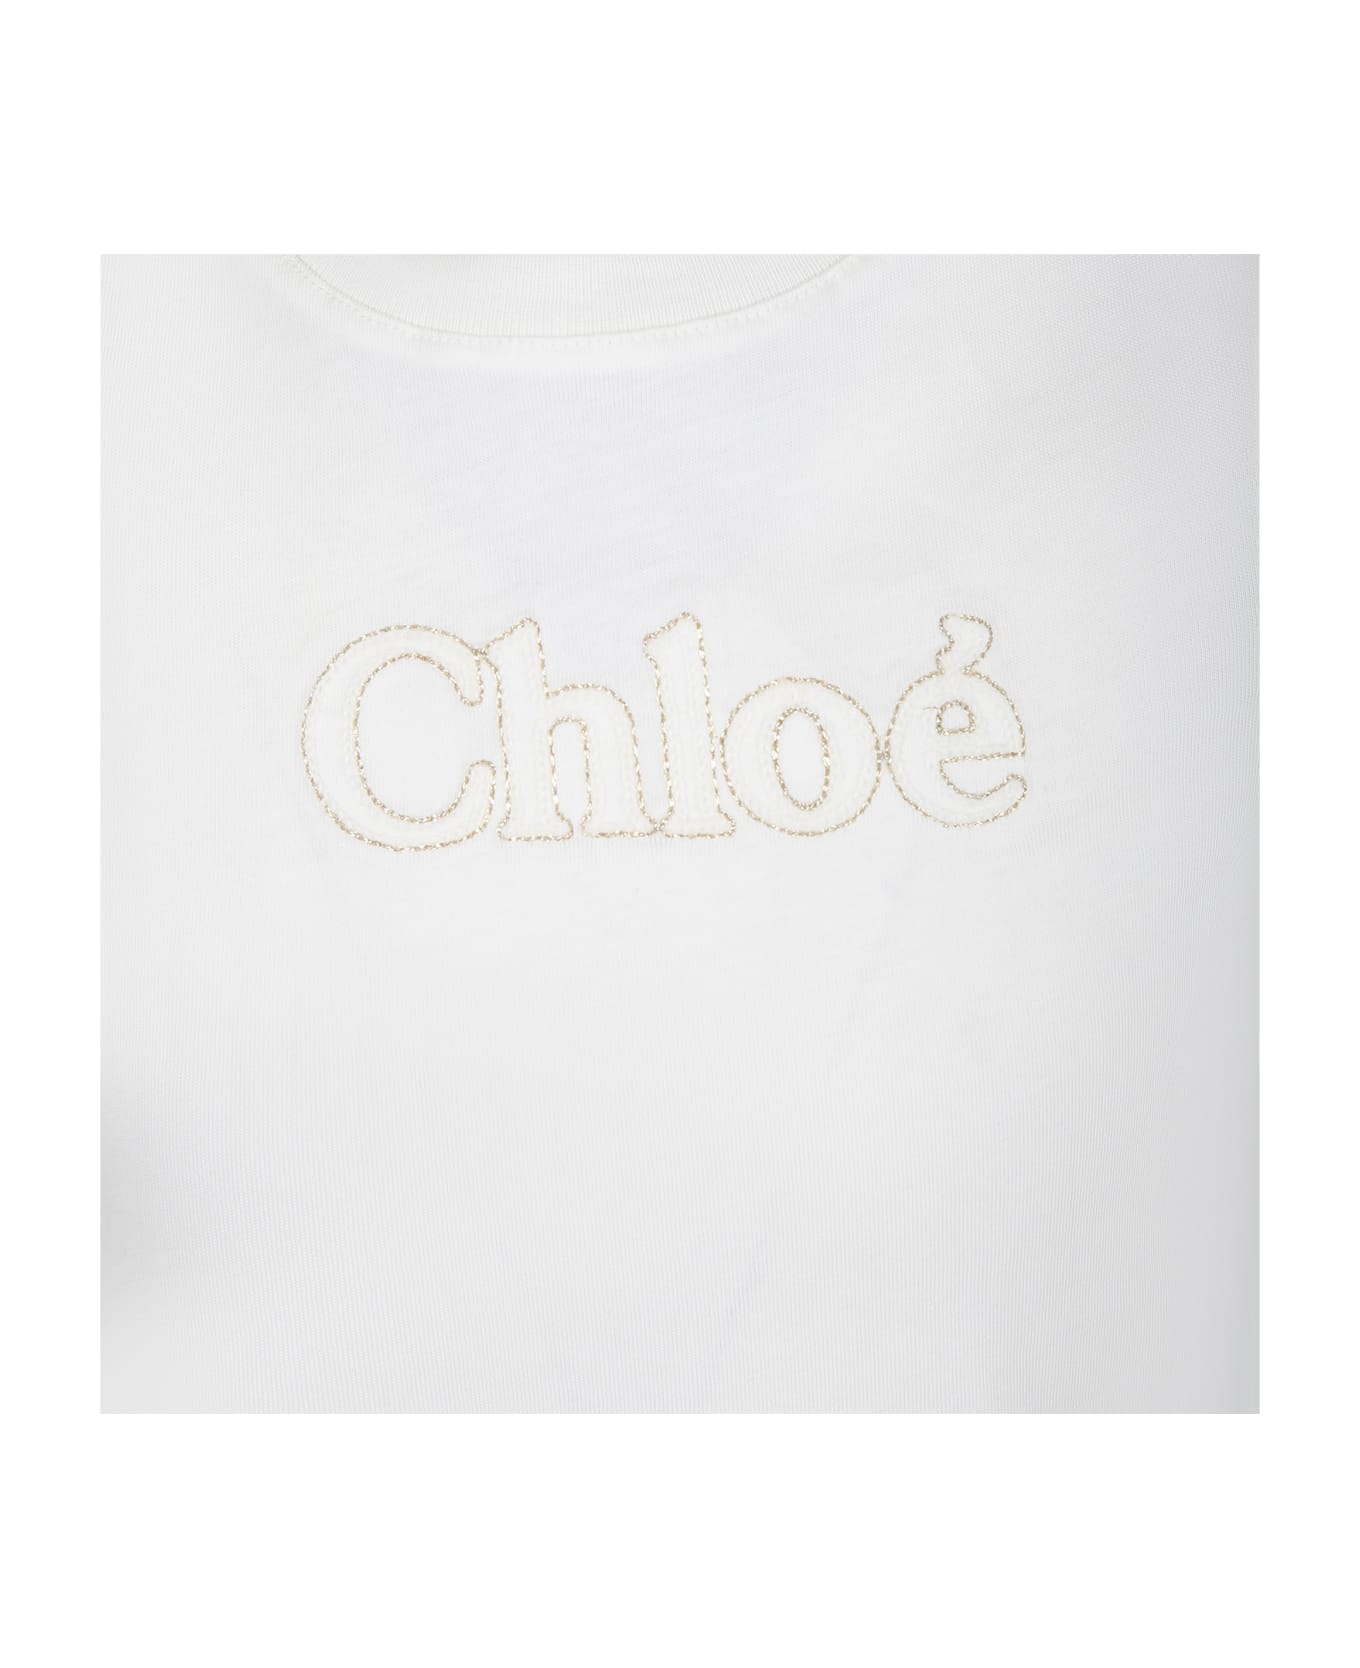 Chloé White T-shirt For Girl With Logo - Bianco